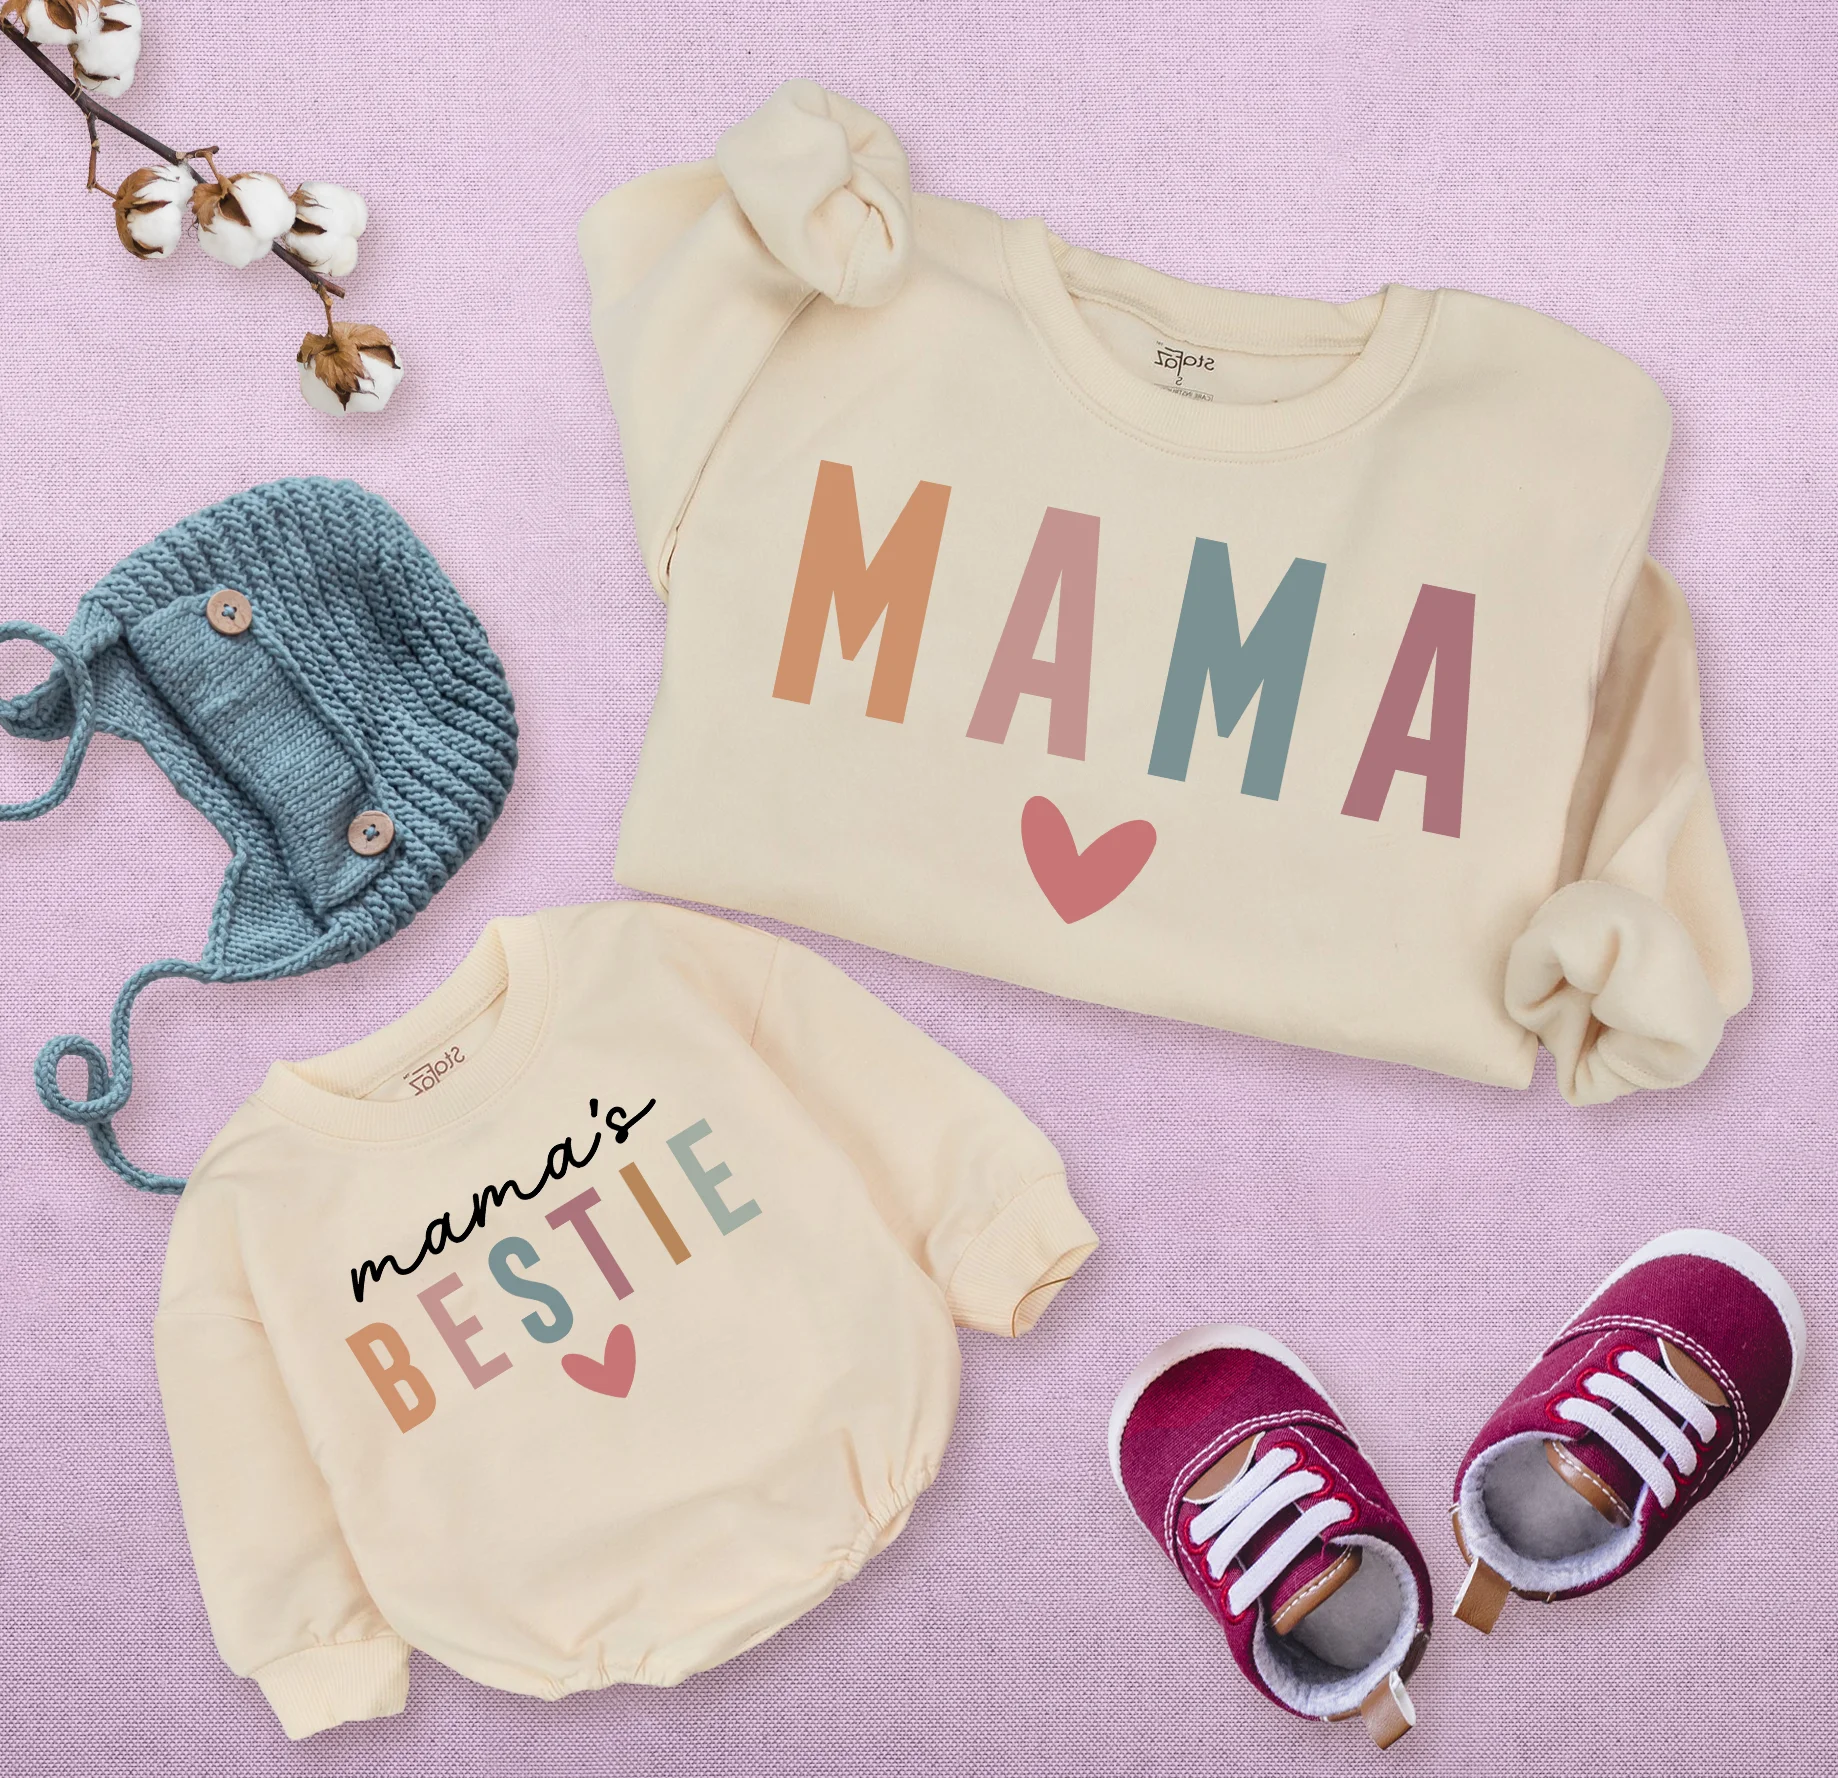 Mama And Mama's Bestie Romper Matching Set - Customized for You!